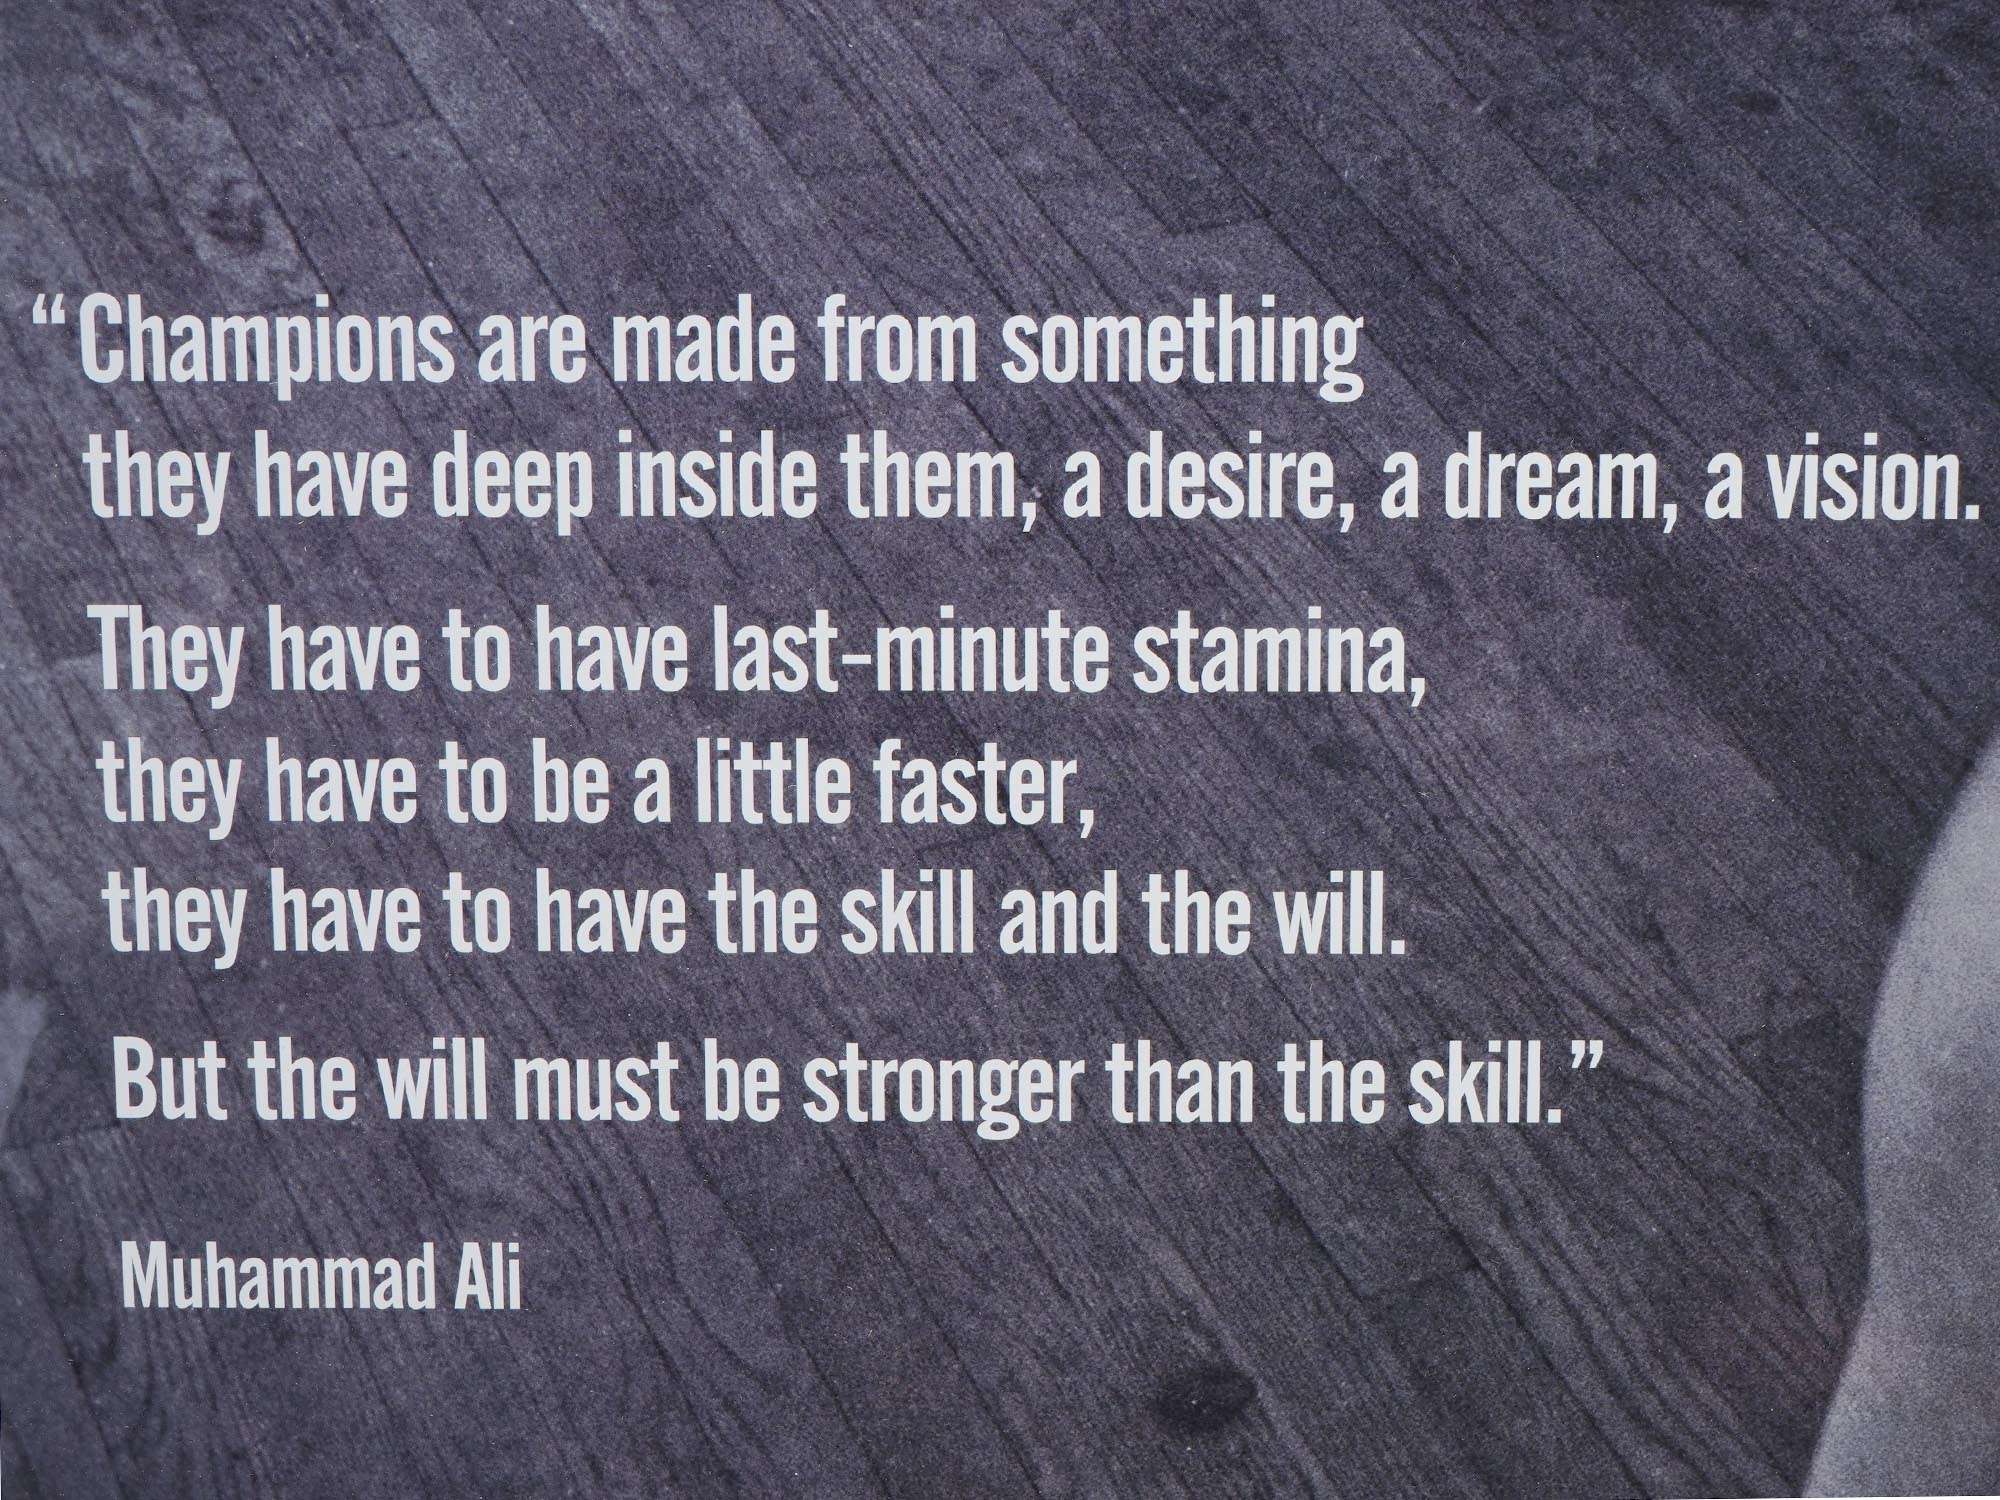 FRAMED POSTER OF MUHAMMAD ALI WITH QUOTE PIC-2